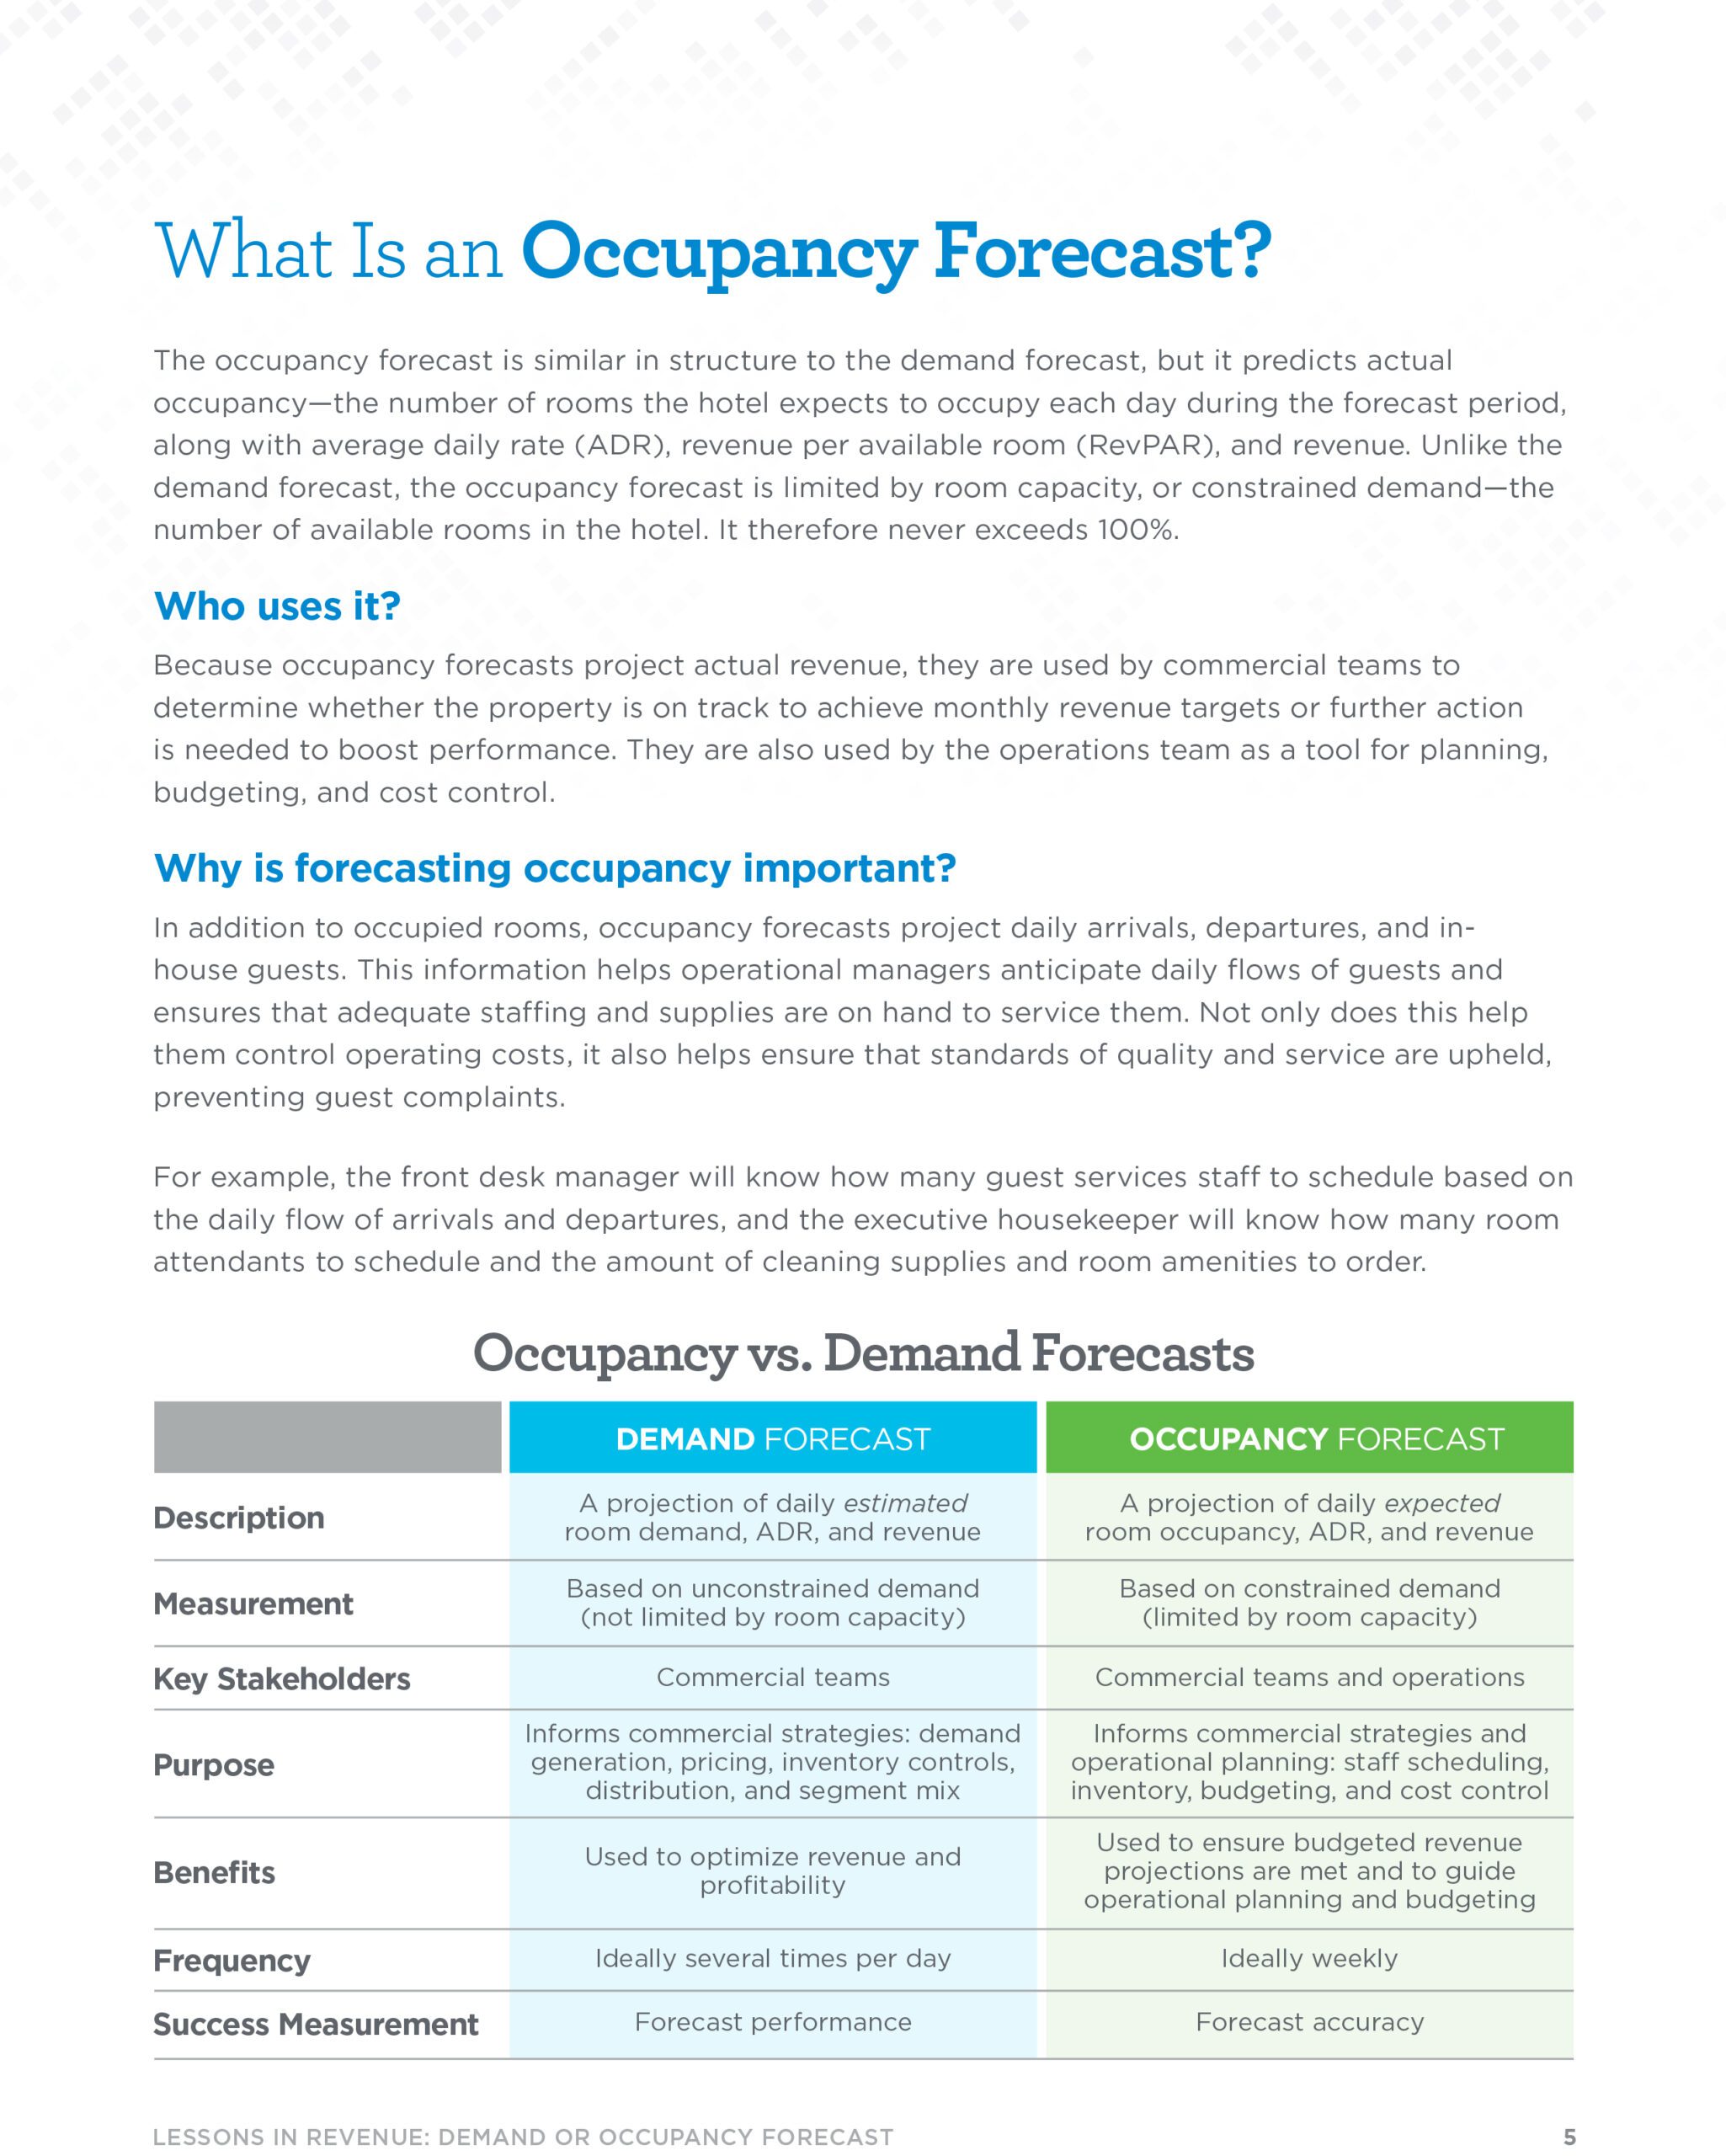 Page 4 - What Is an Occupancy Forecast?